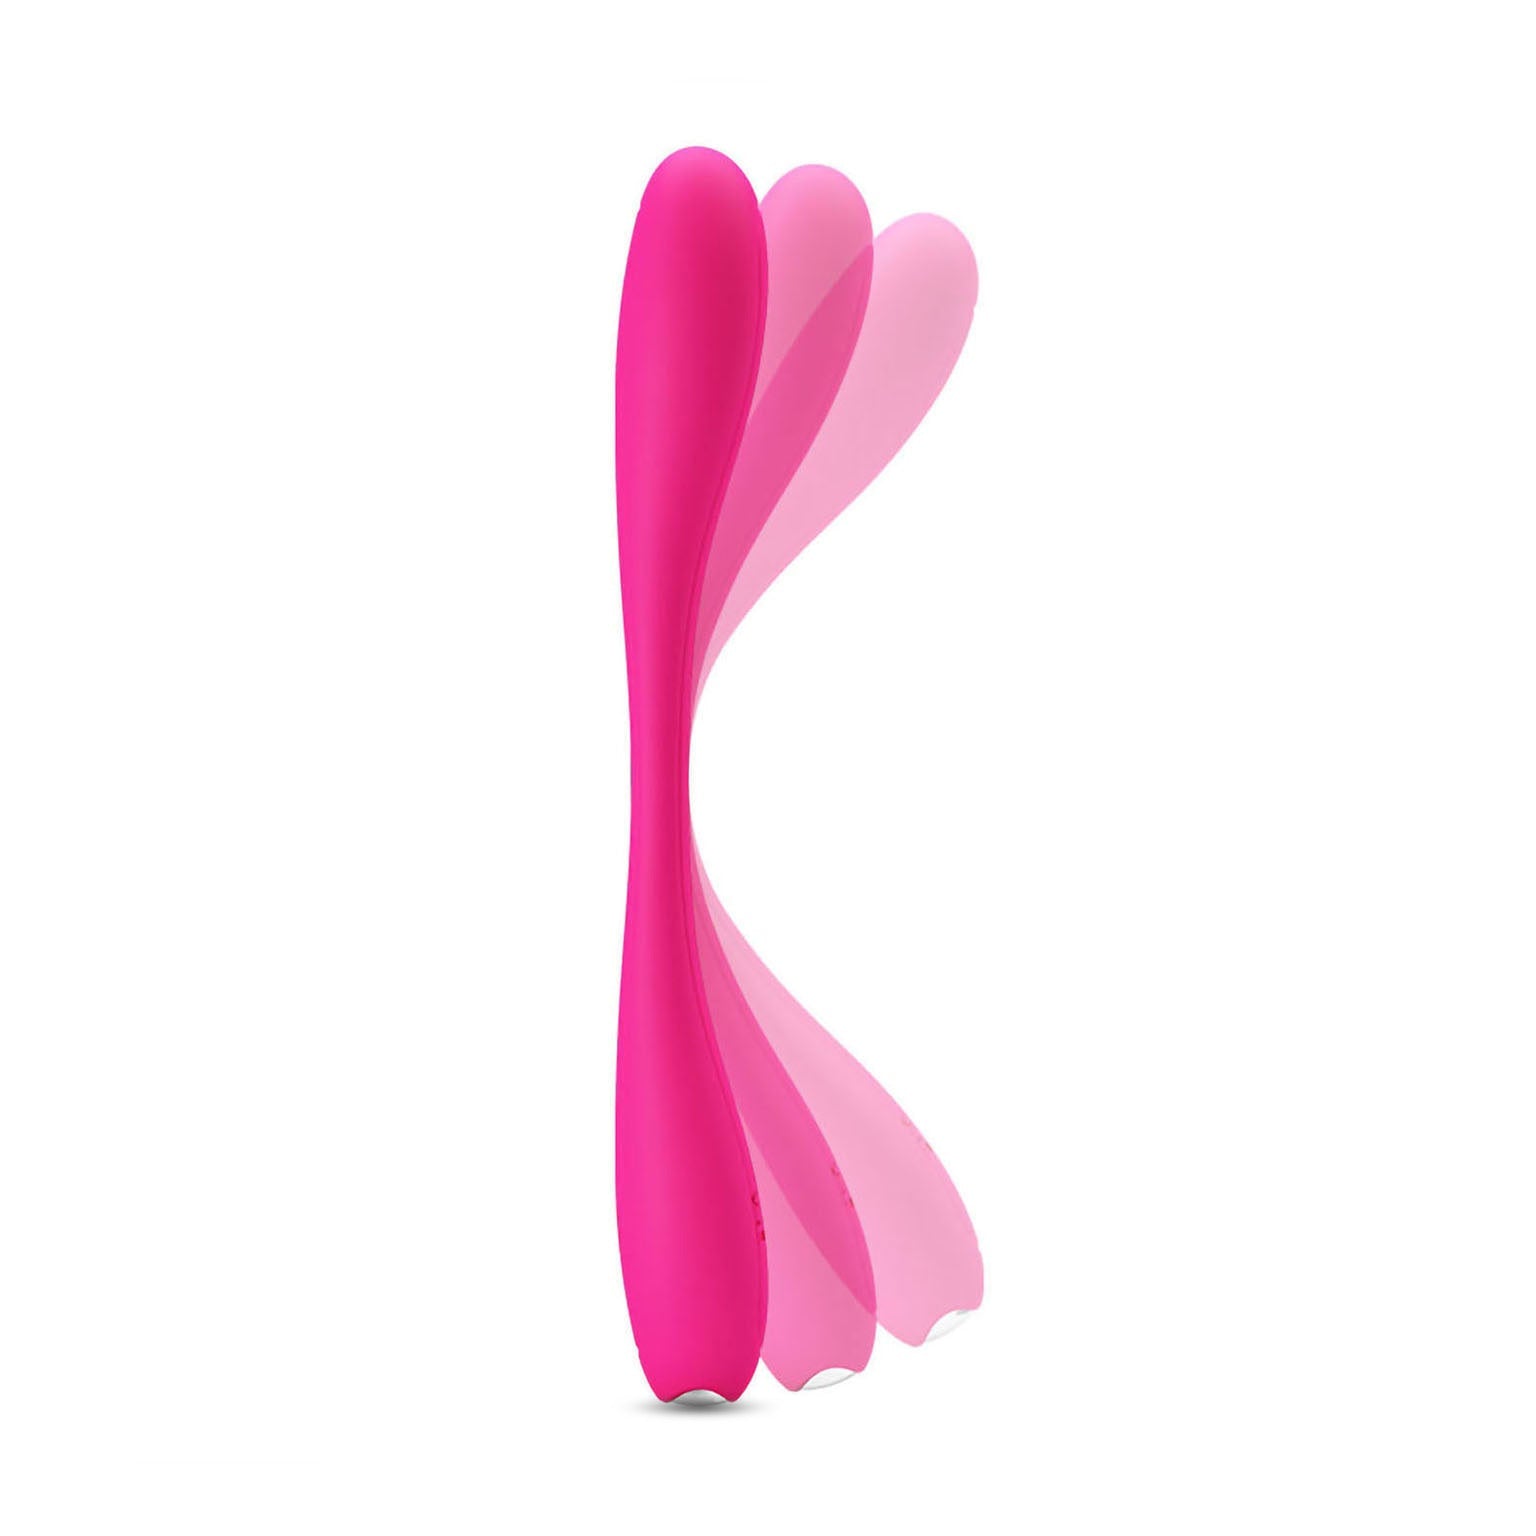 Silicone Bendable Anal Clit G-spot Vibrator Massager Wearable Couple Sex Toys